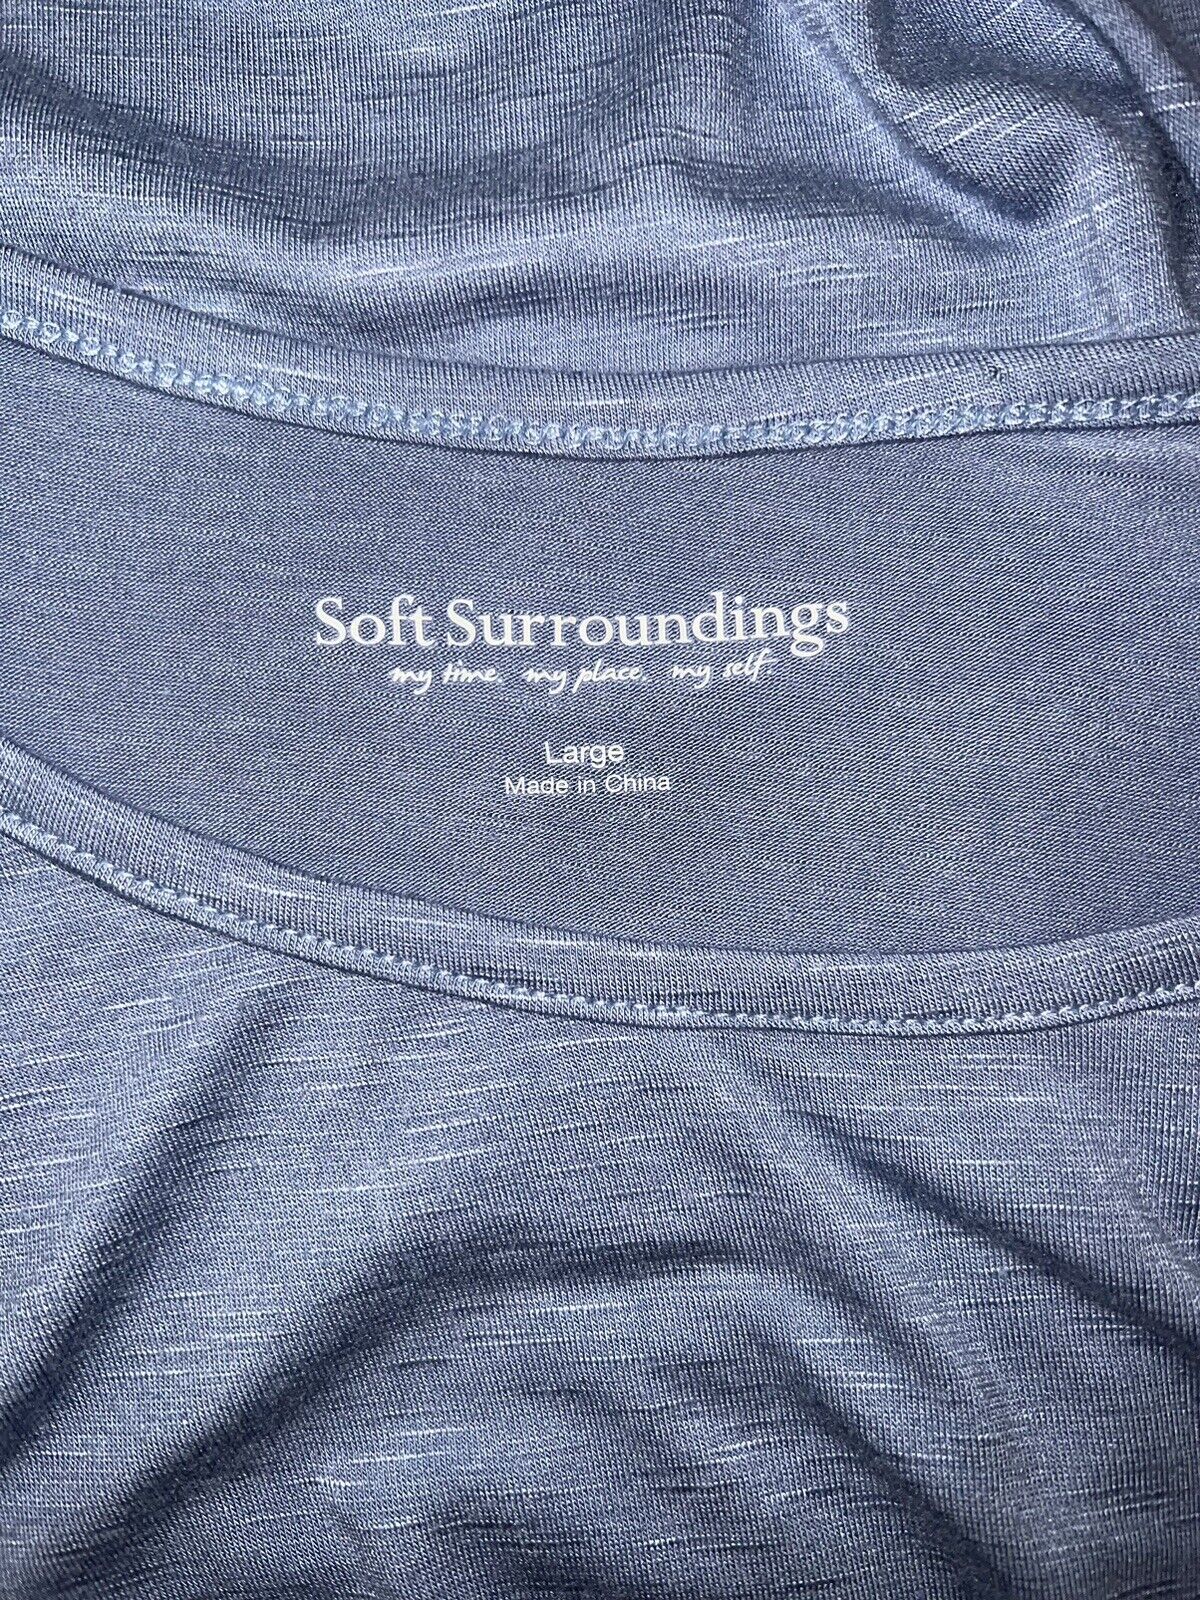 Soft Surroundings Blue Asymmetric Top Embroidered… - image 4